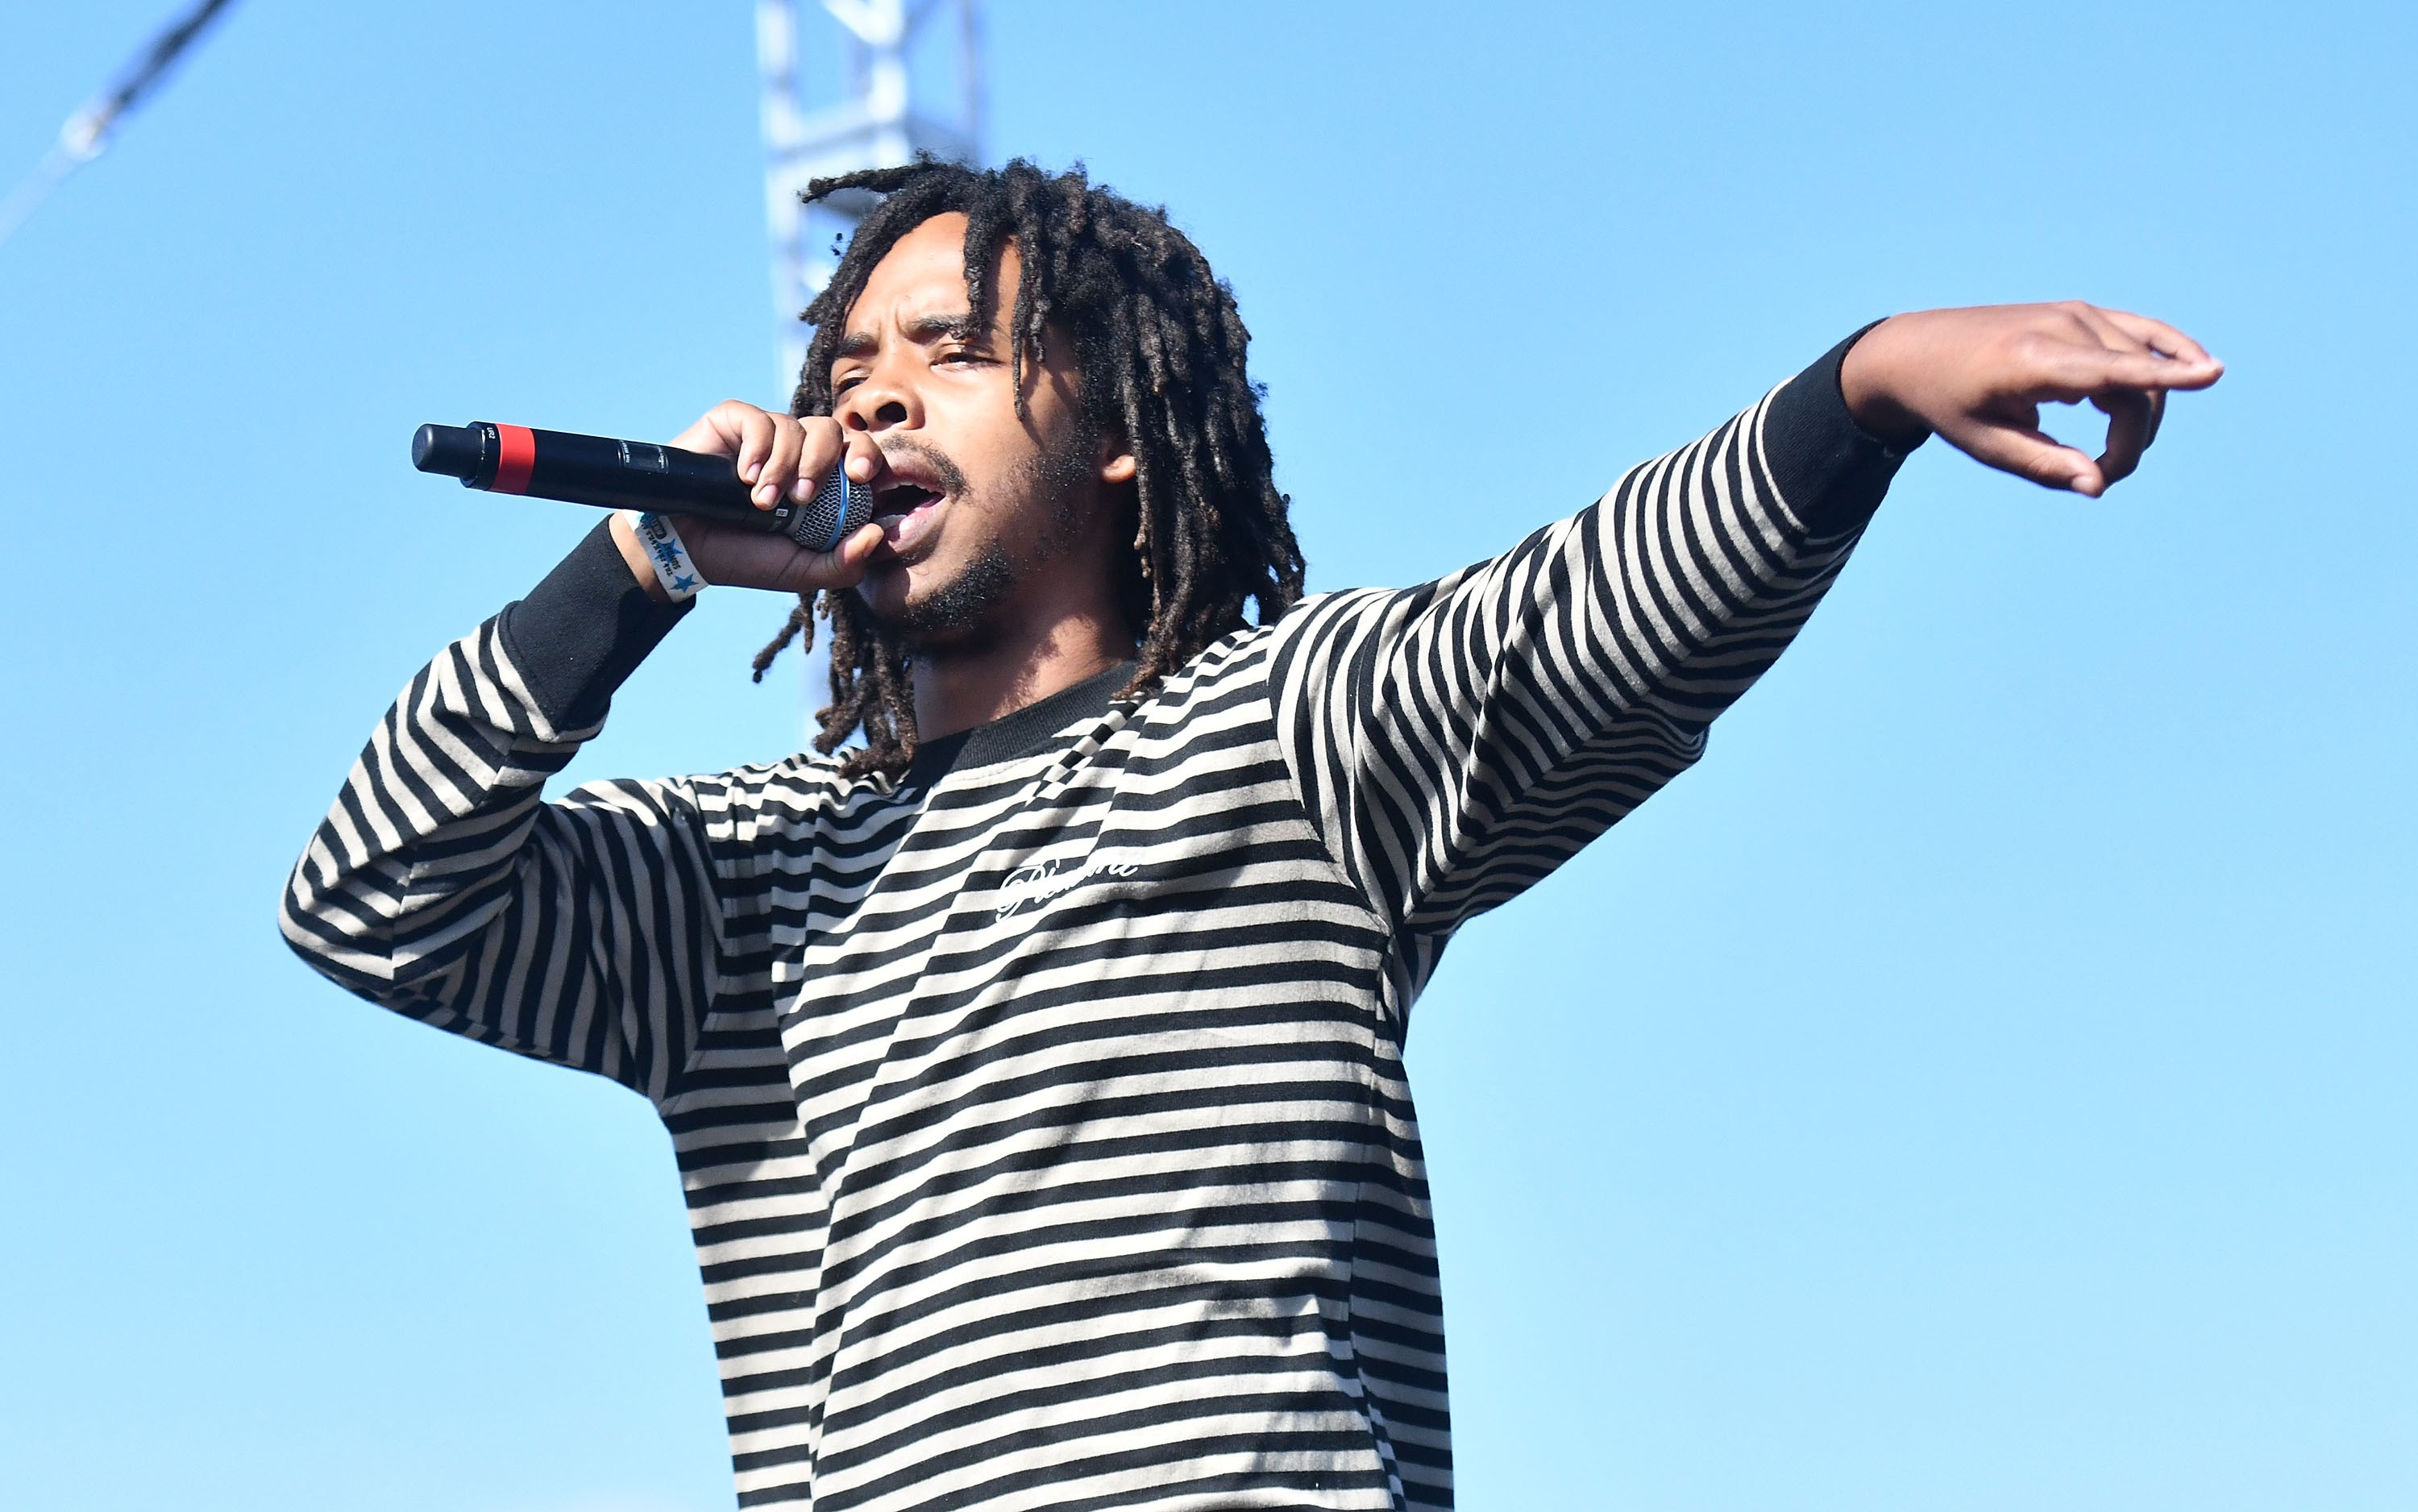 Earl Sweatshirt Cancels European Festival Dates - Earl Sweatshirt Cancels European Festival Dates, Citing Anxiety and Depression SPIN